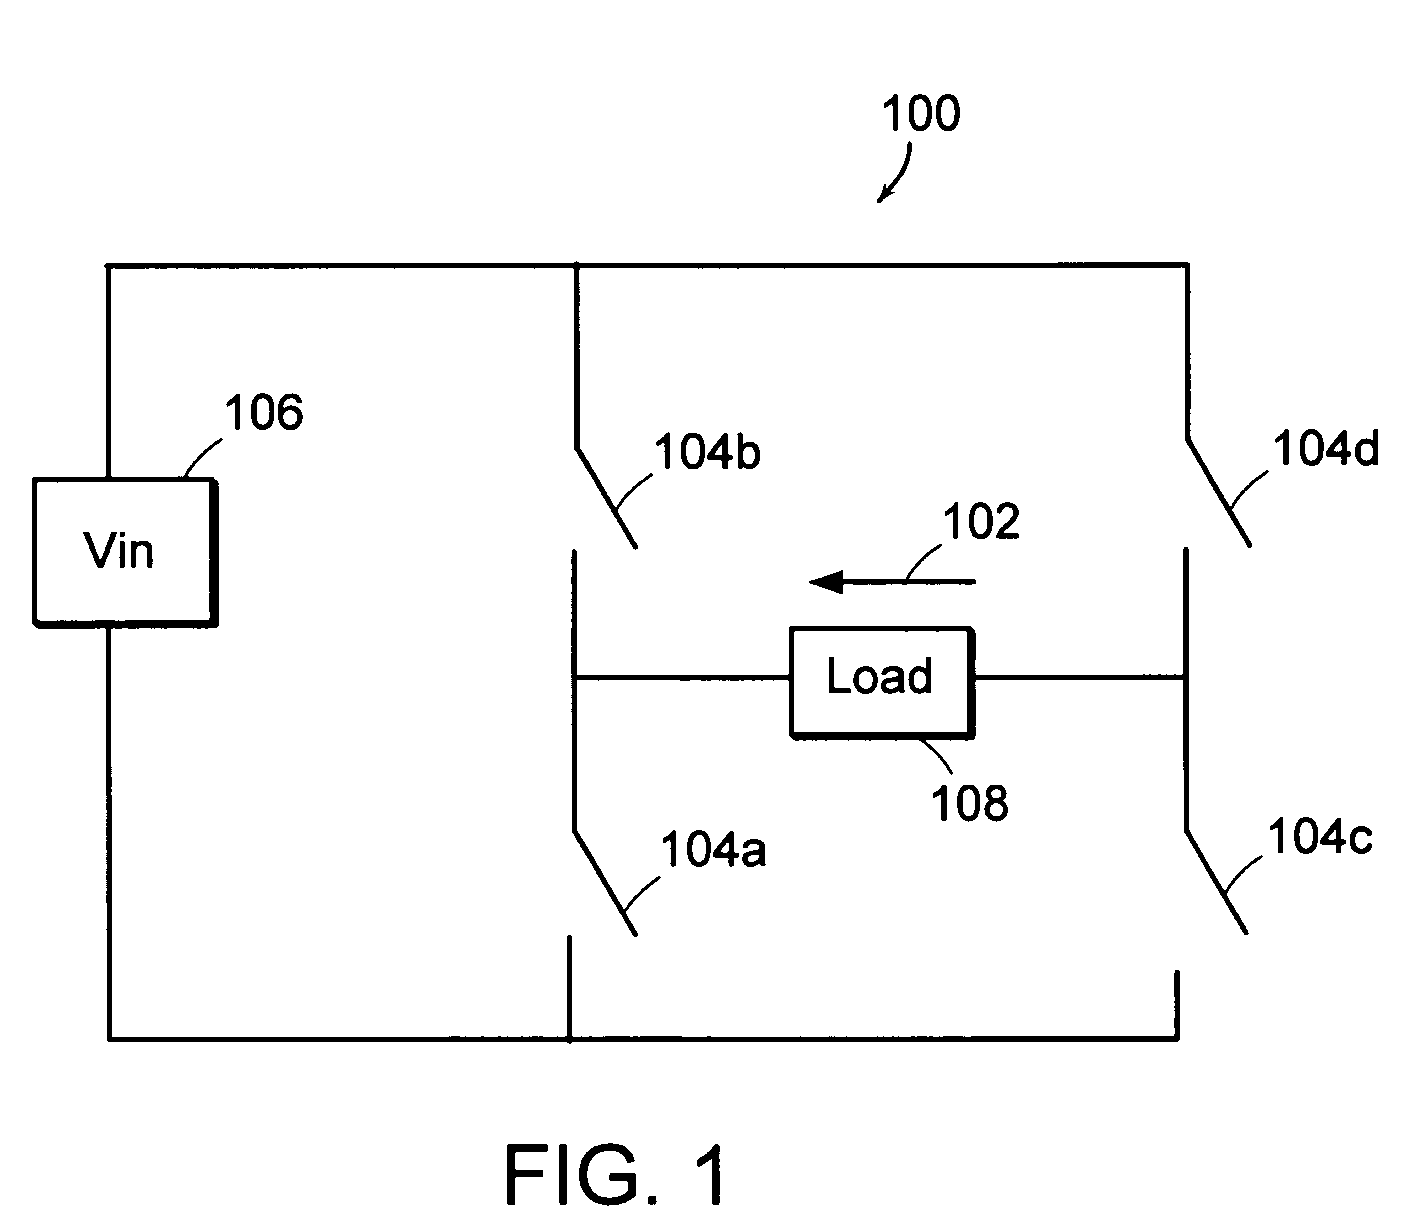 Control circuit for switching power supply